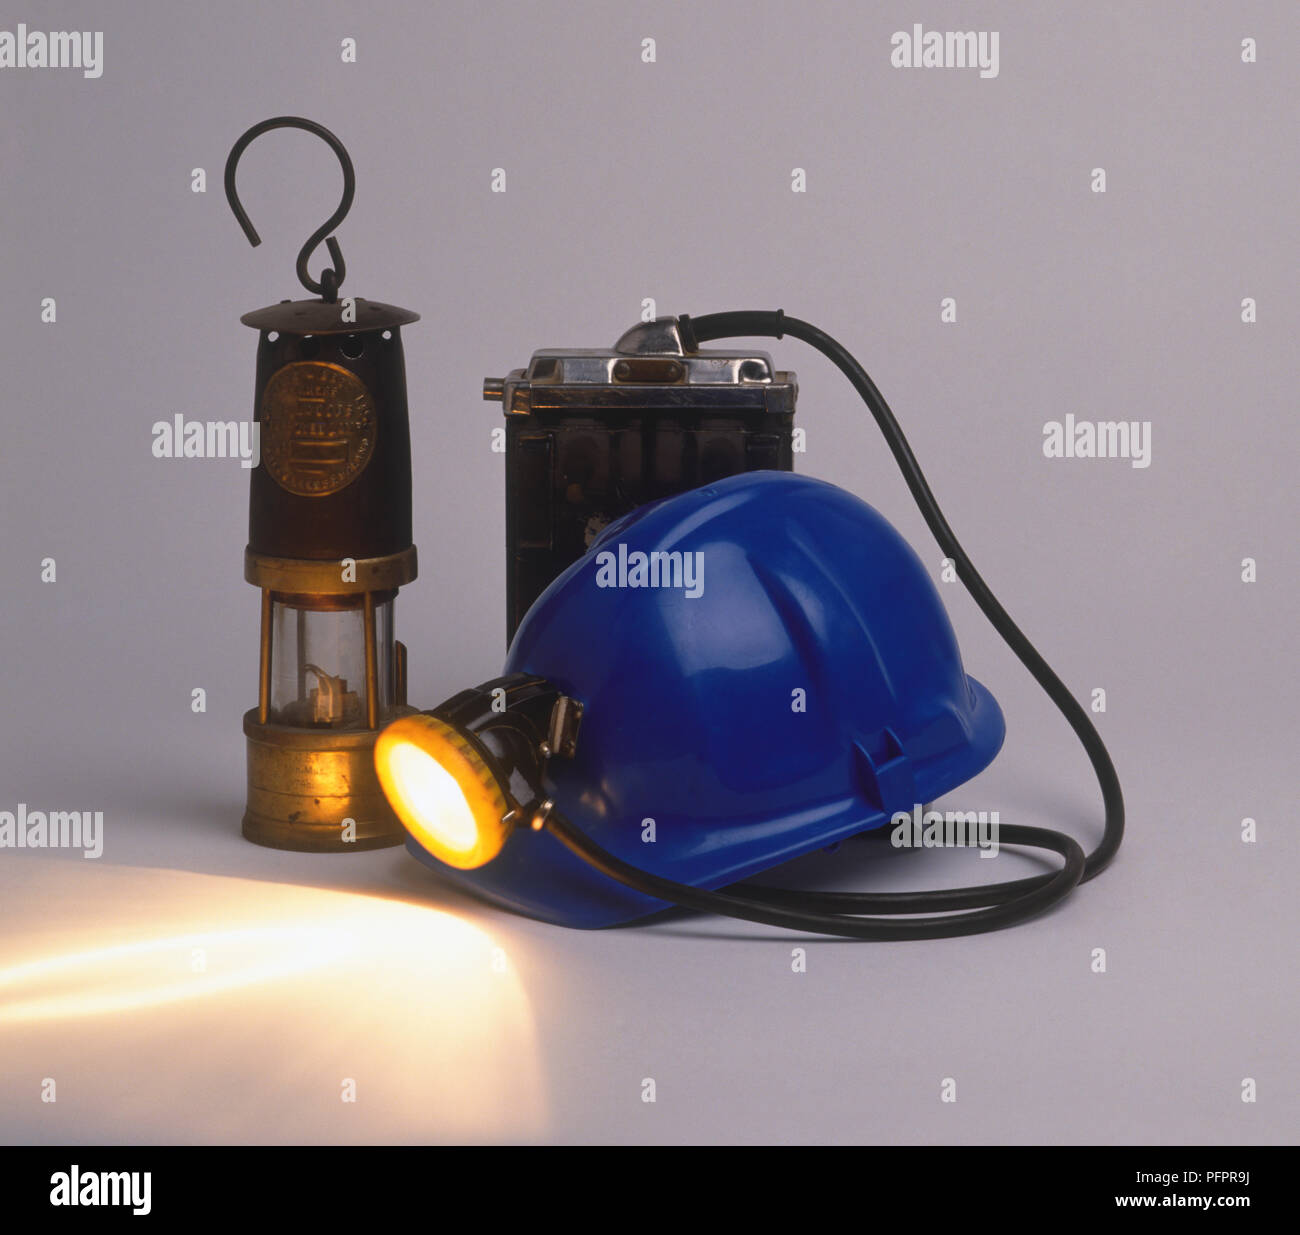 Davy lamp, and mining hardhat with headlight attached to battery, close-up Stock Photo